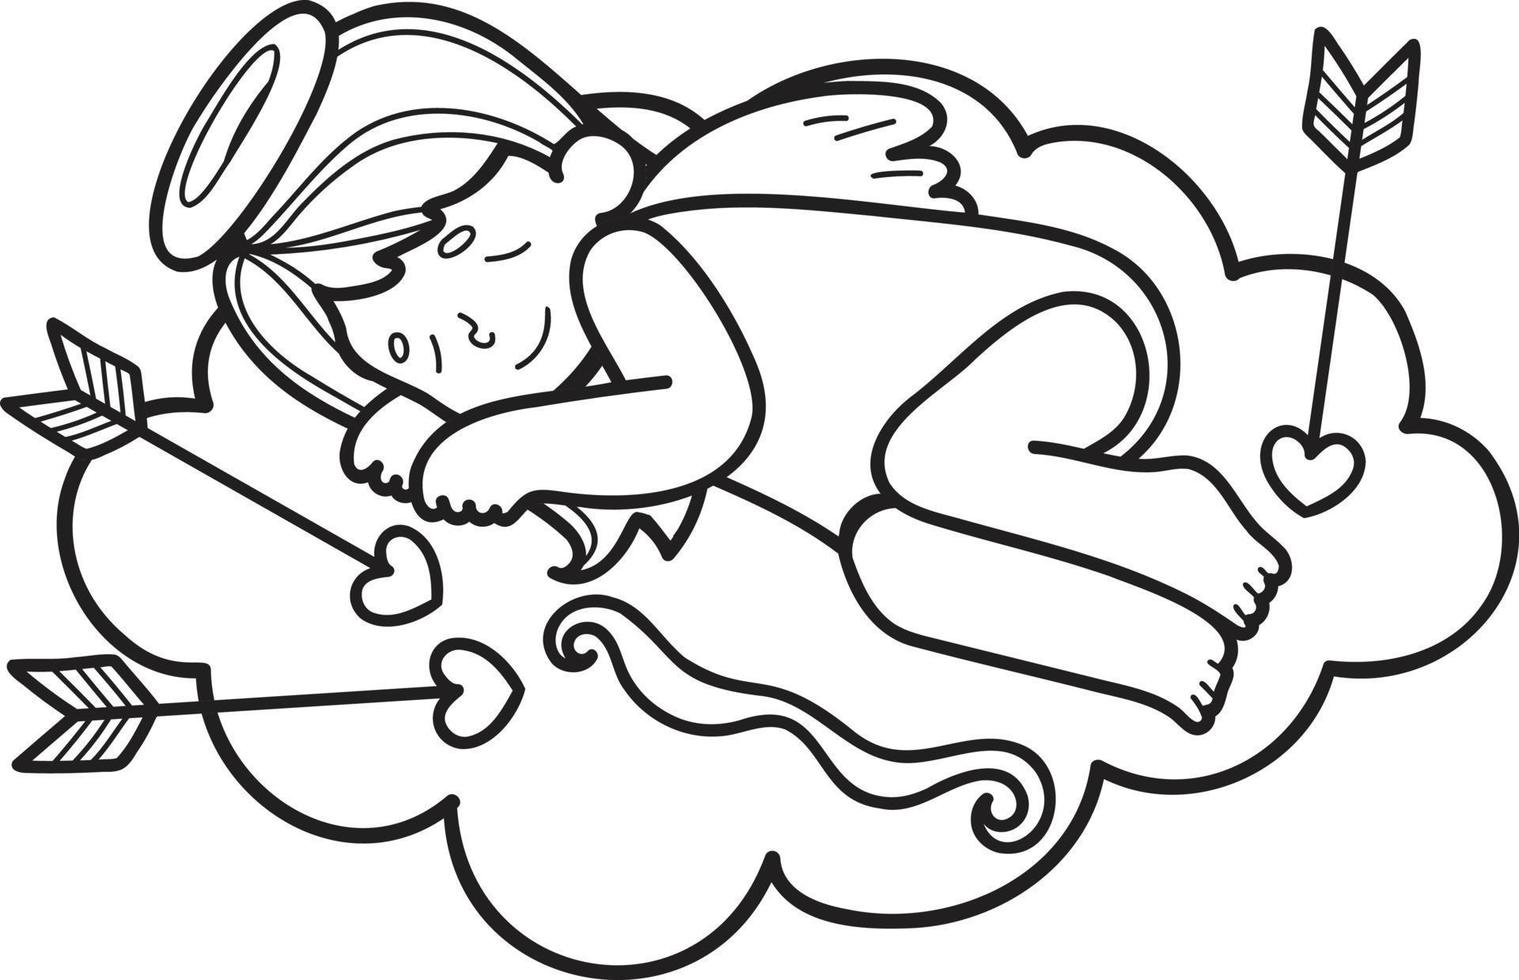 Hand Drawn cupid with clouds illustration vector